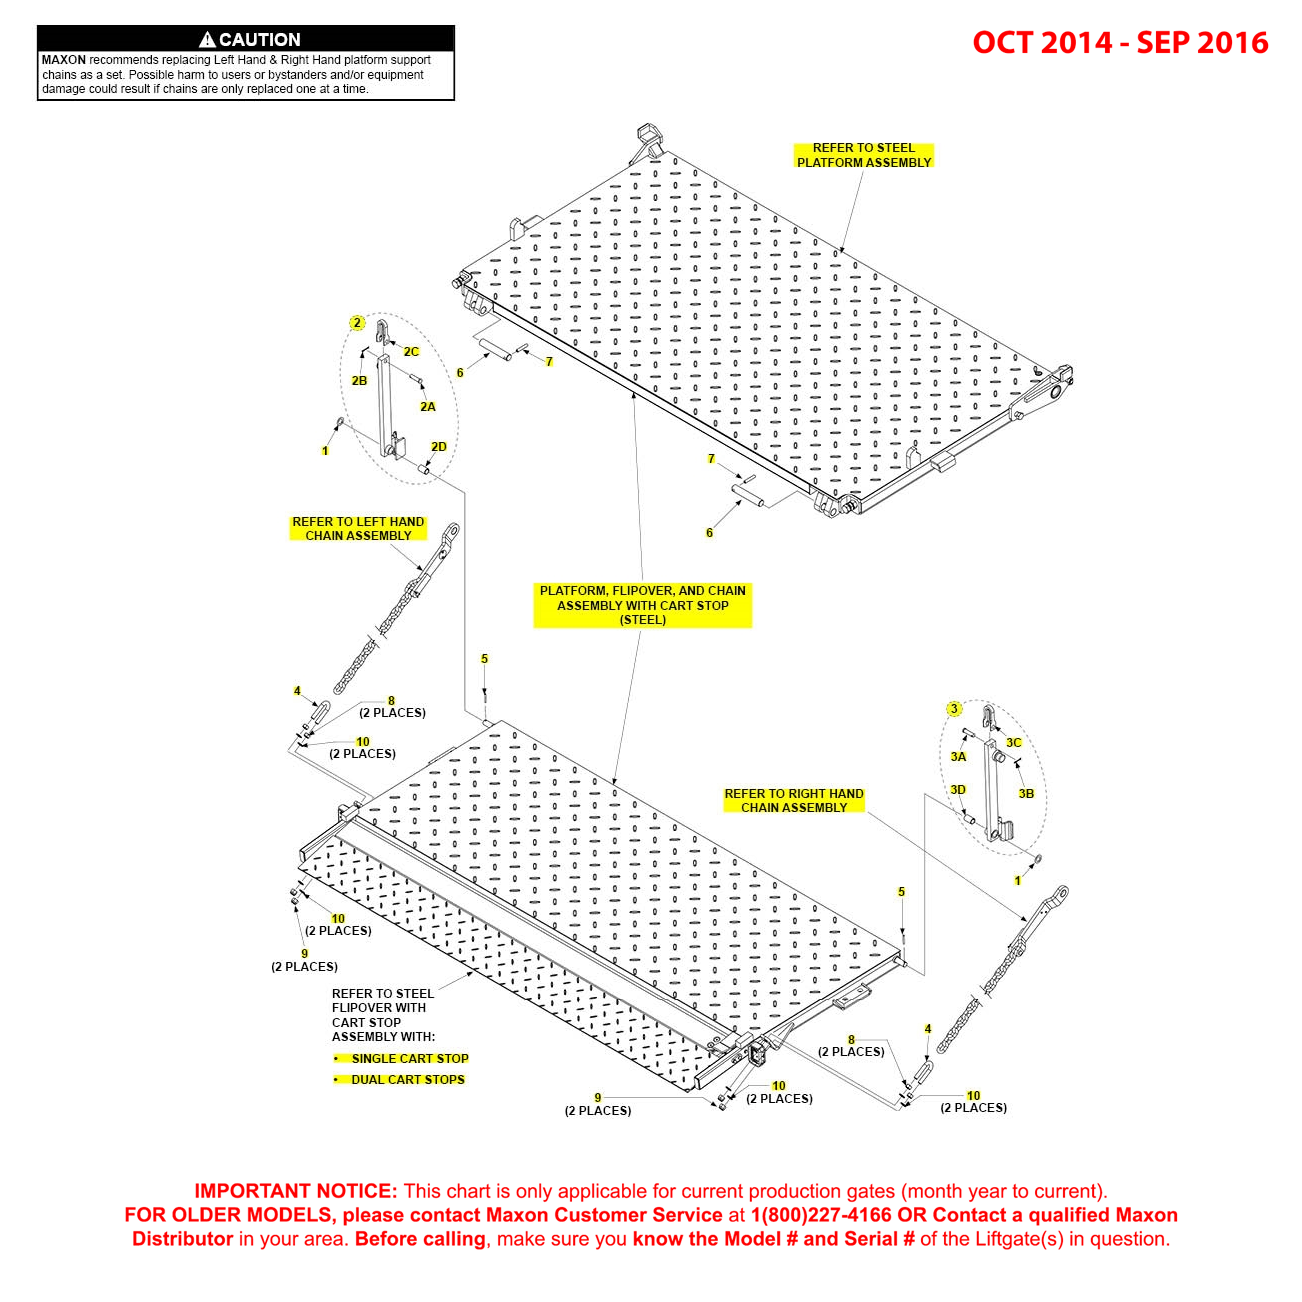 Maxon BMR-CS (Oct 2014 - Sep 2016) Steel Platform Flipover And Chain Assembly With Cart Stop Diagram